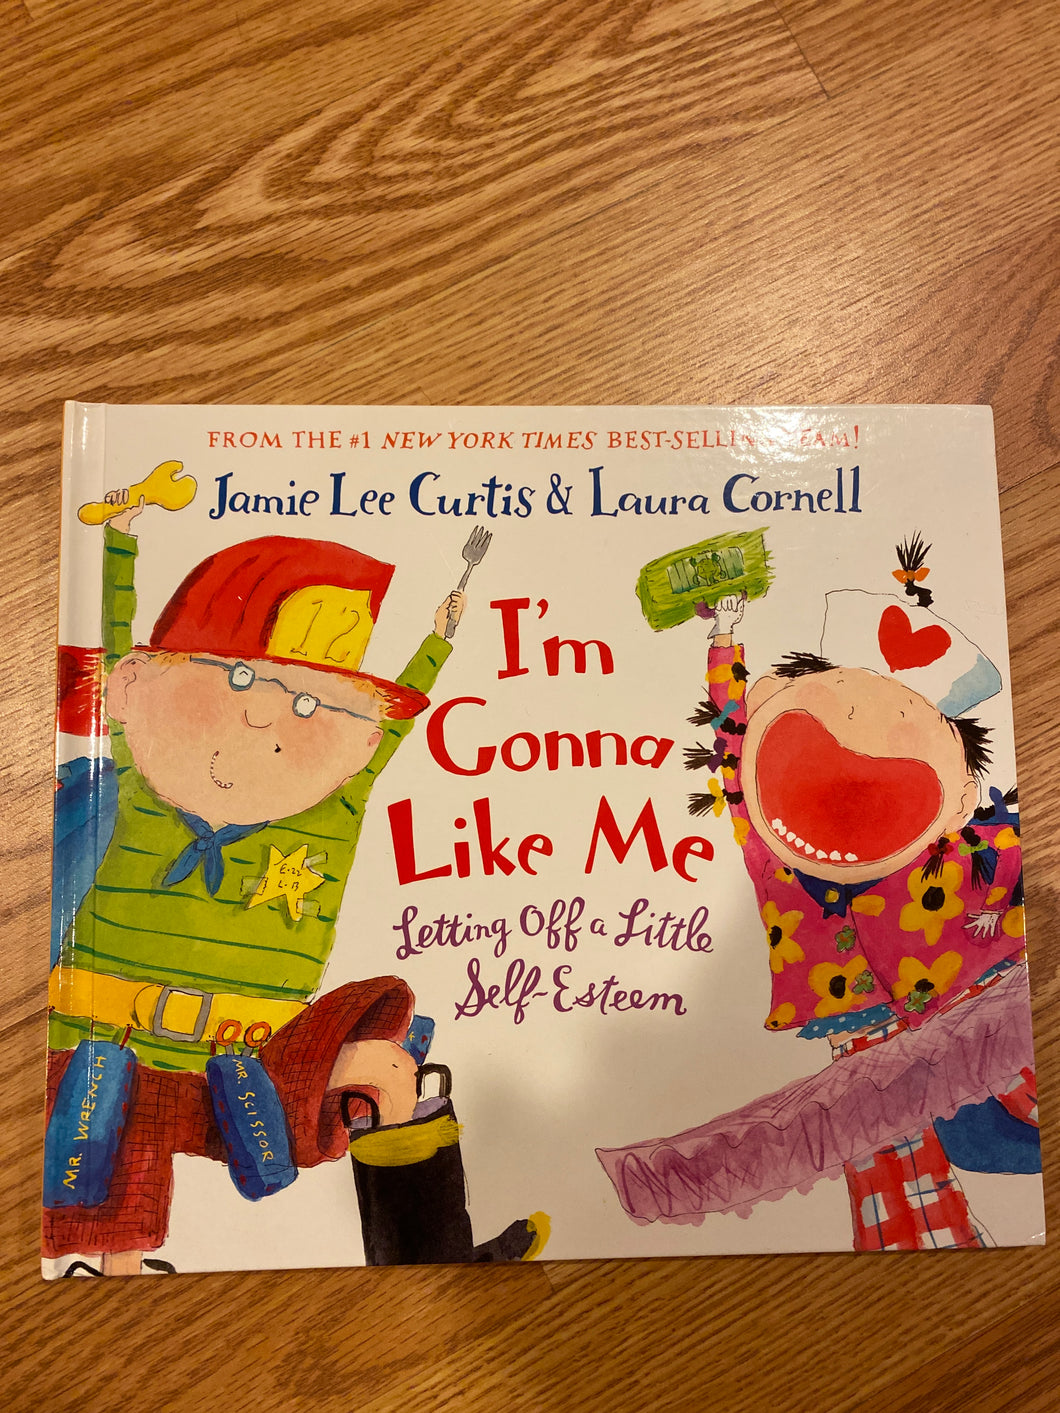 I'm Going to Like Me!  NEW! Book by Jamie Lee Curtis